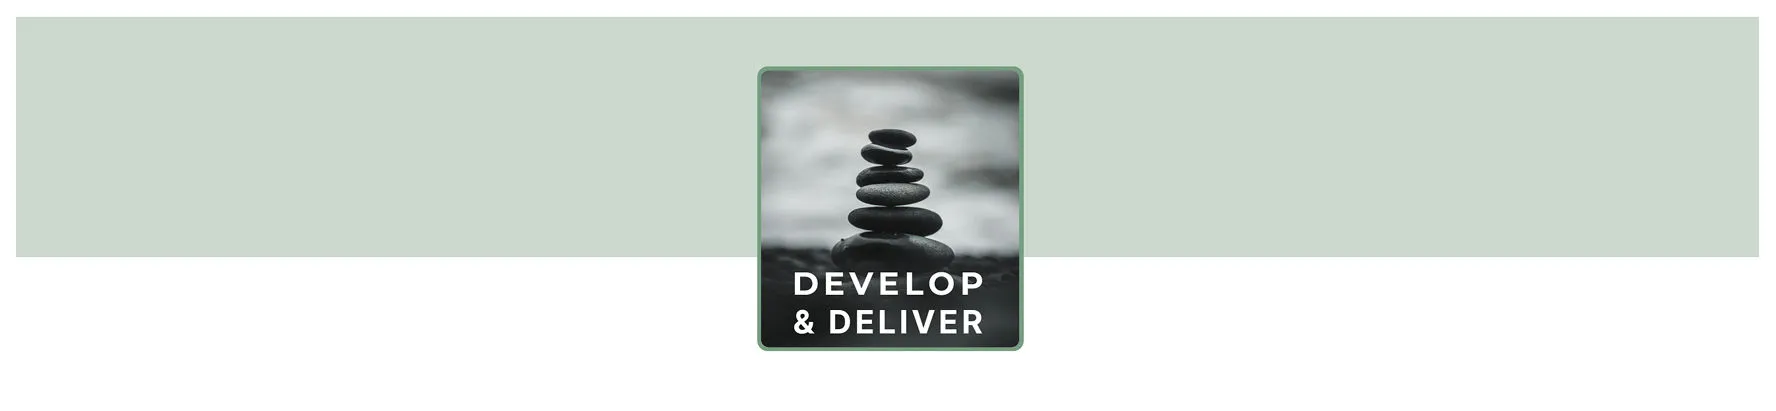 develop and deliver